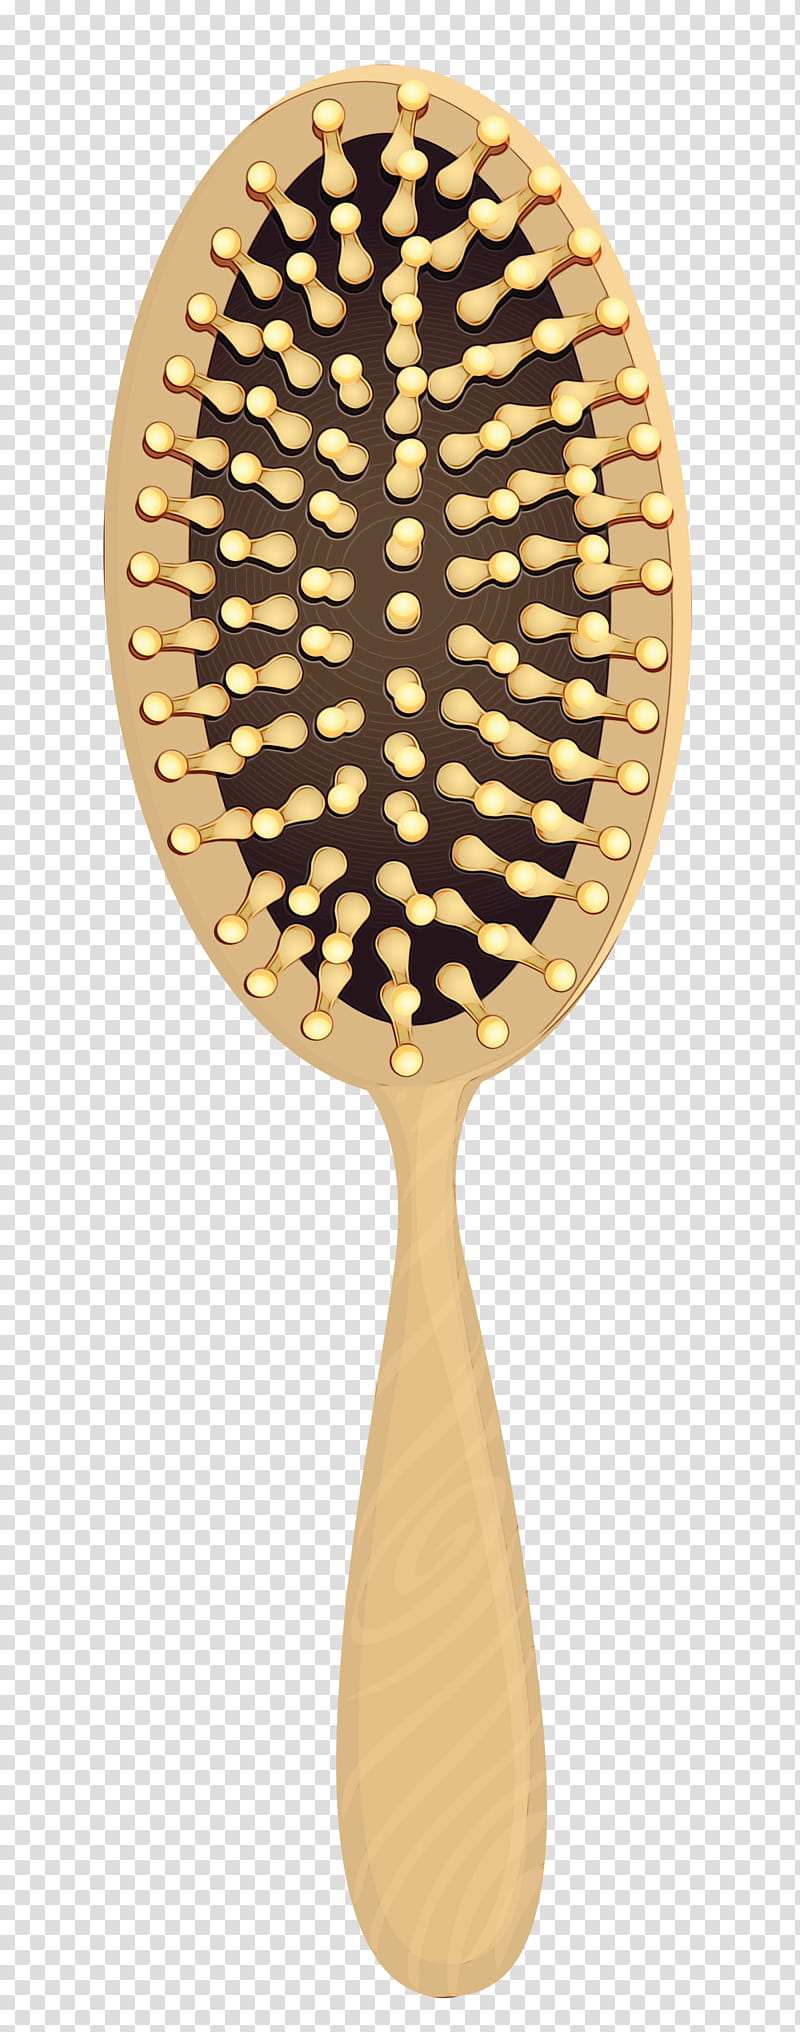 Wooden Spoon, Comb, Hairbrush, Head Hair, Web Design, Racquet Sport transparent background PNG clipart